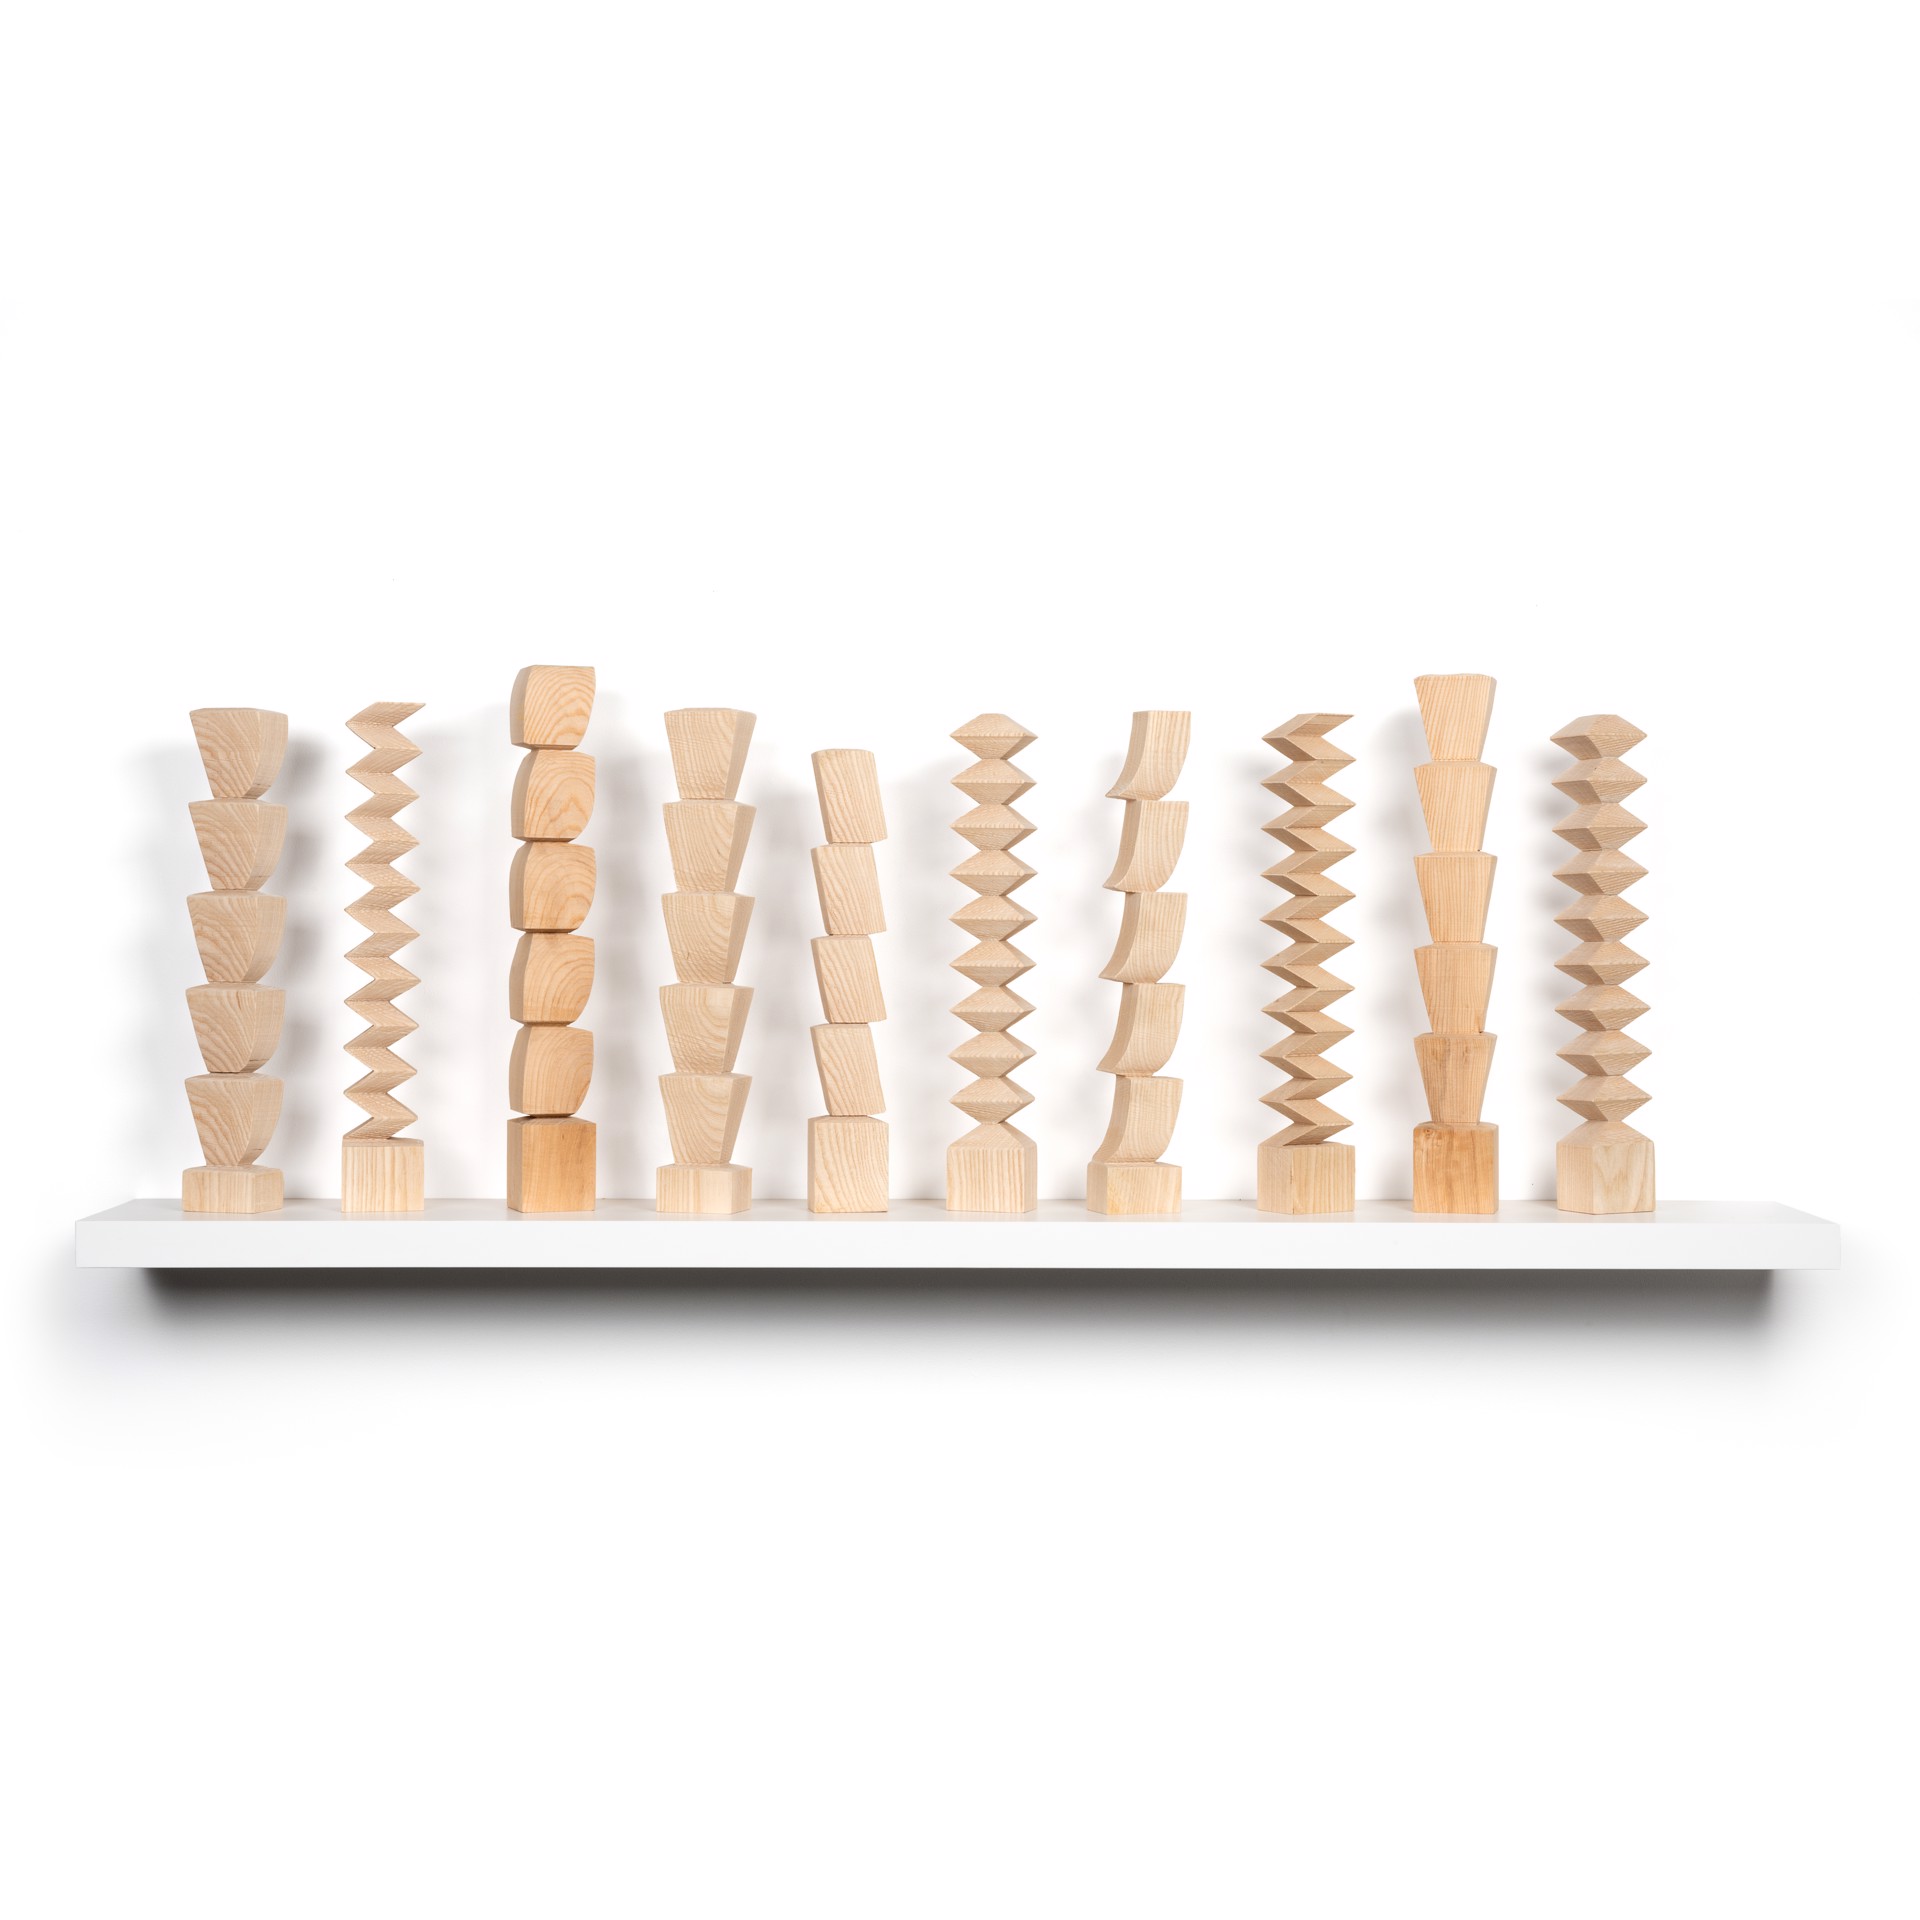 Repeating Shape Columns by Ellie Richards